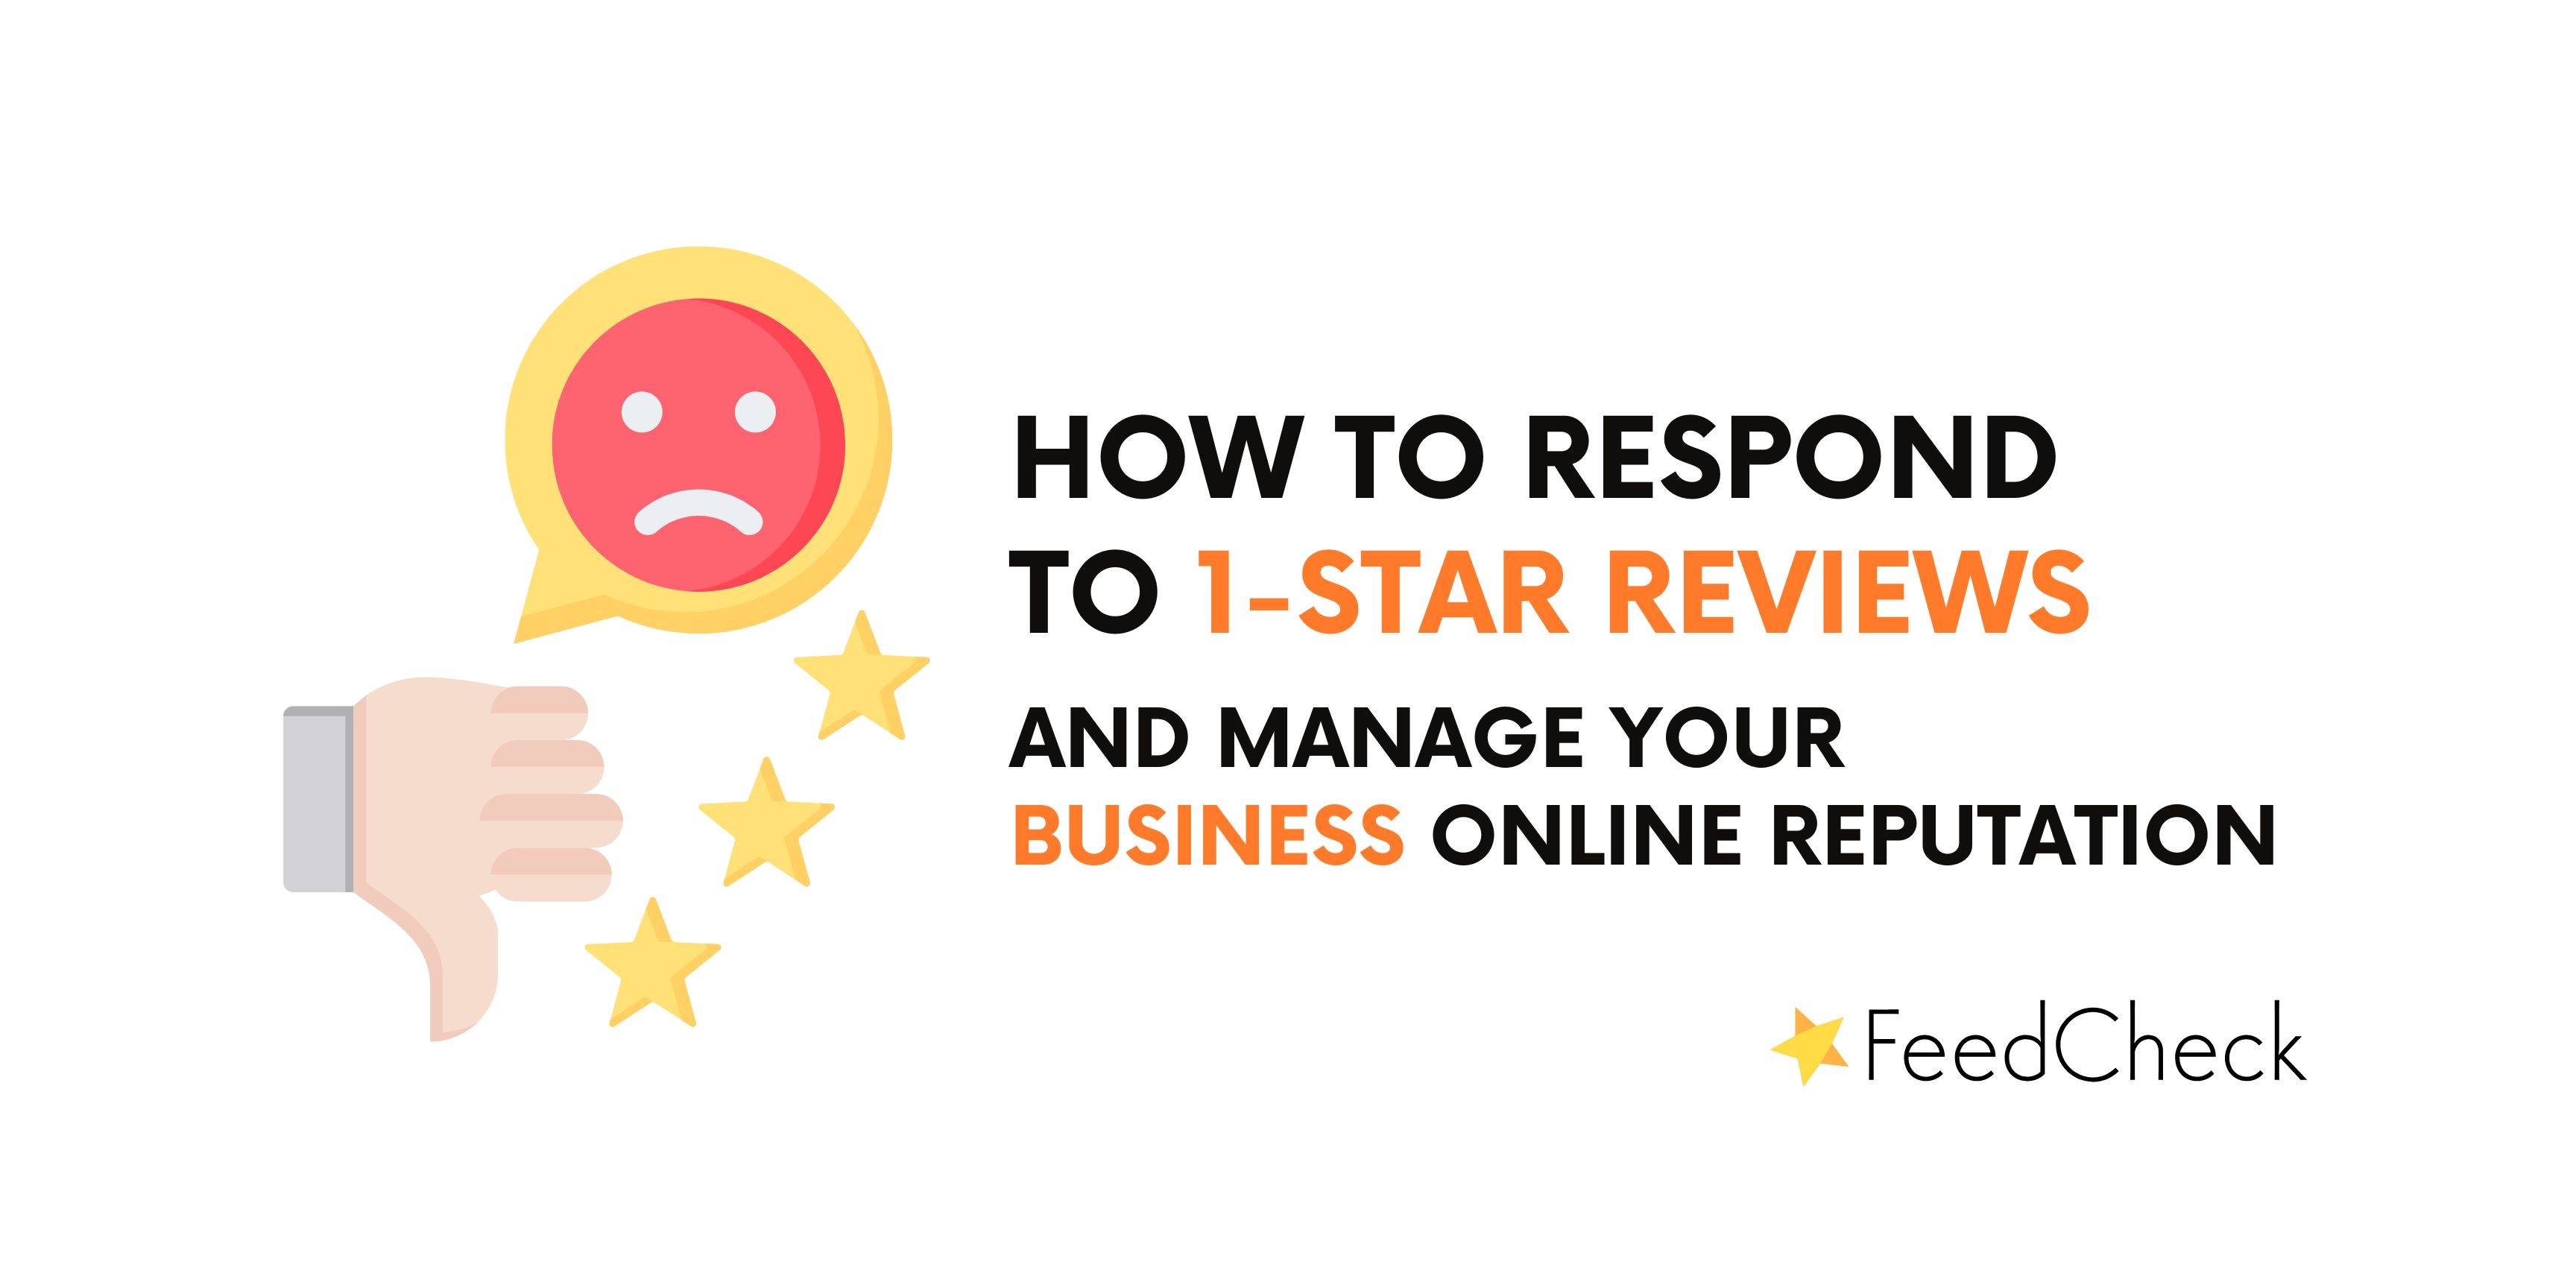 How to respond to 1-star reviews and manage your business online reputation